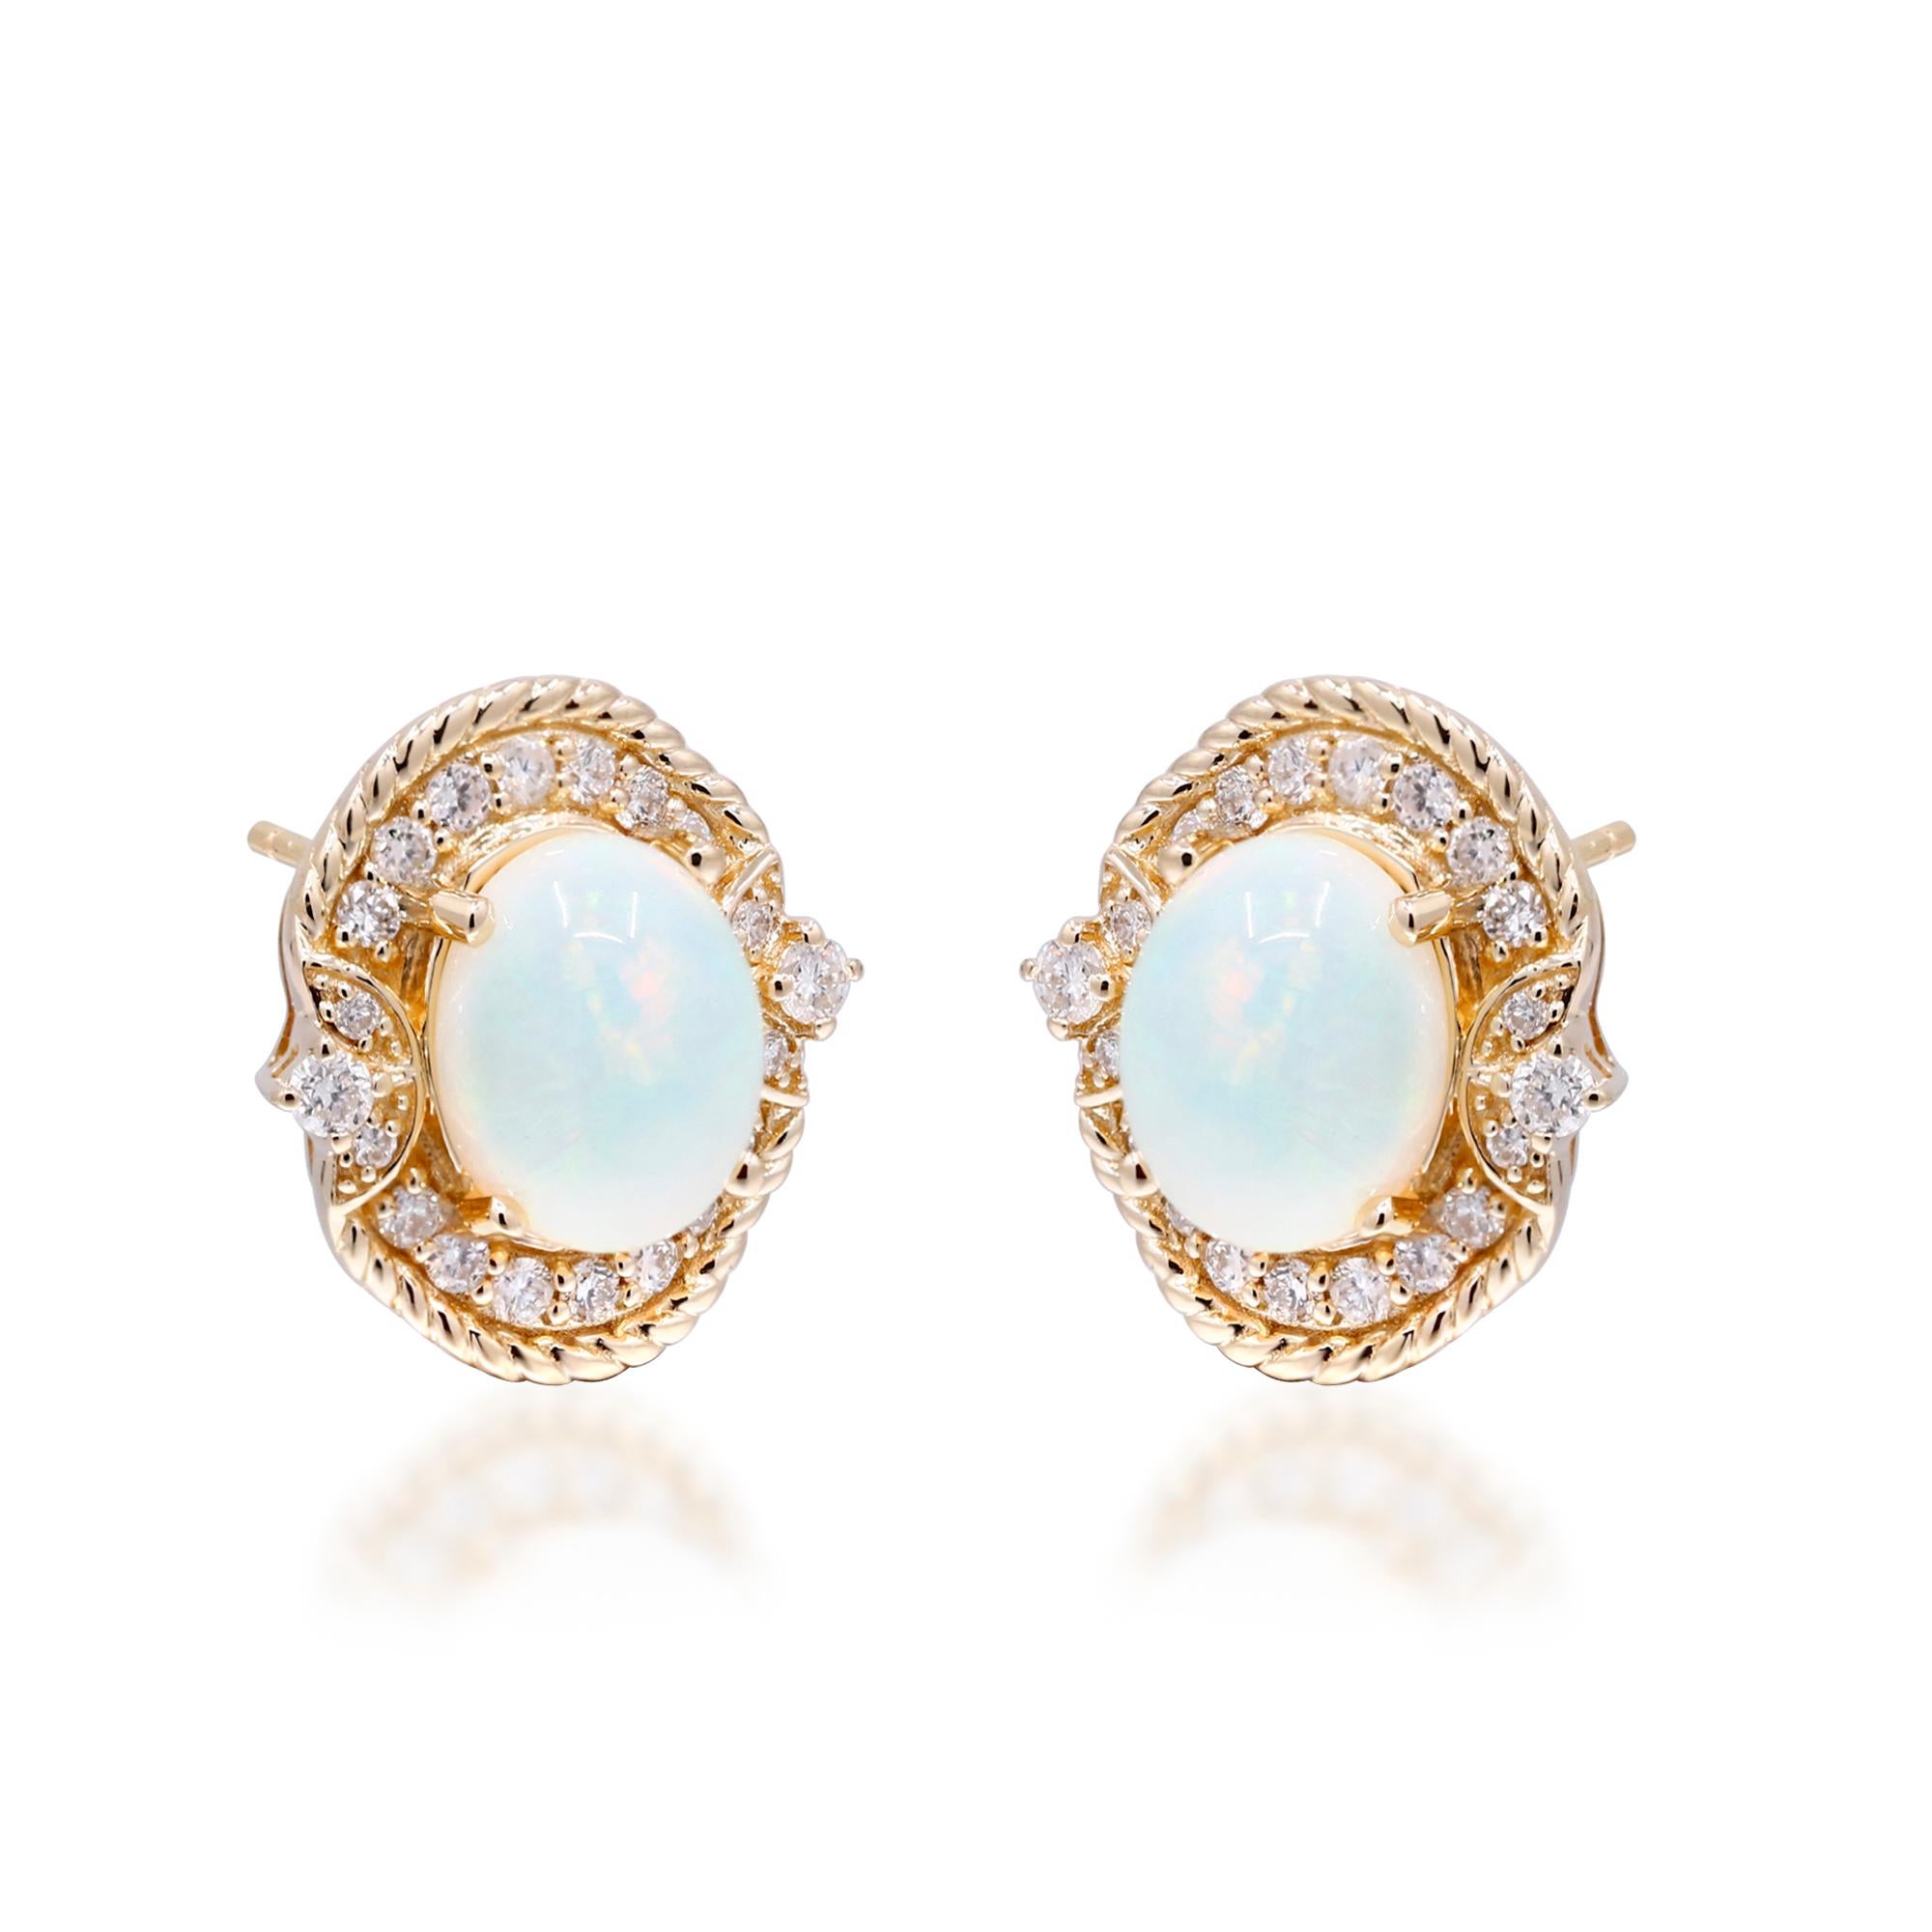 Decorate yourself in elegance with this Earring is crafted from 10-karat Yellow Gold by Gin & Grace Earring. This Earring is made up of 9x7 mm Oval - Cab (2pcs) 2.37 carat Ethiopian Opal and Round-cut White Diamond (40 Pcs) 0.46 Carat. This Earring